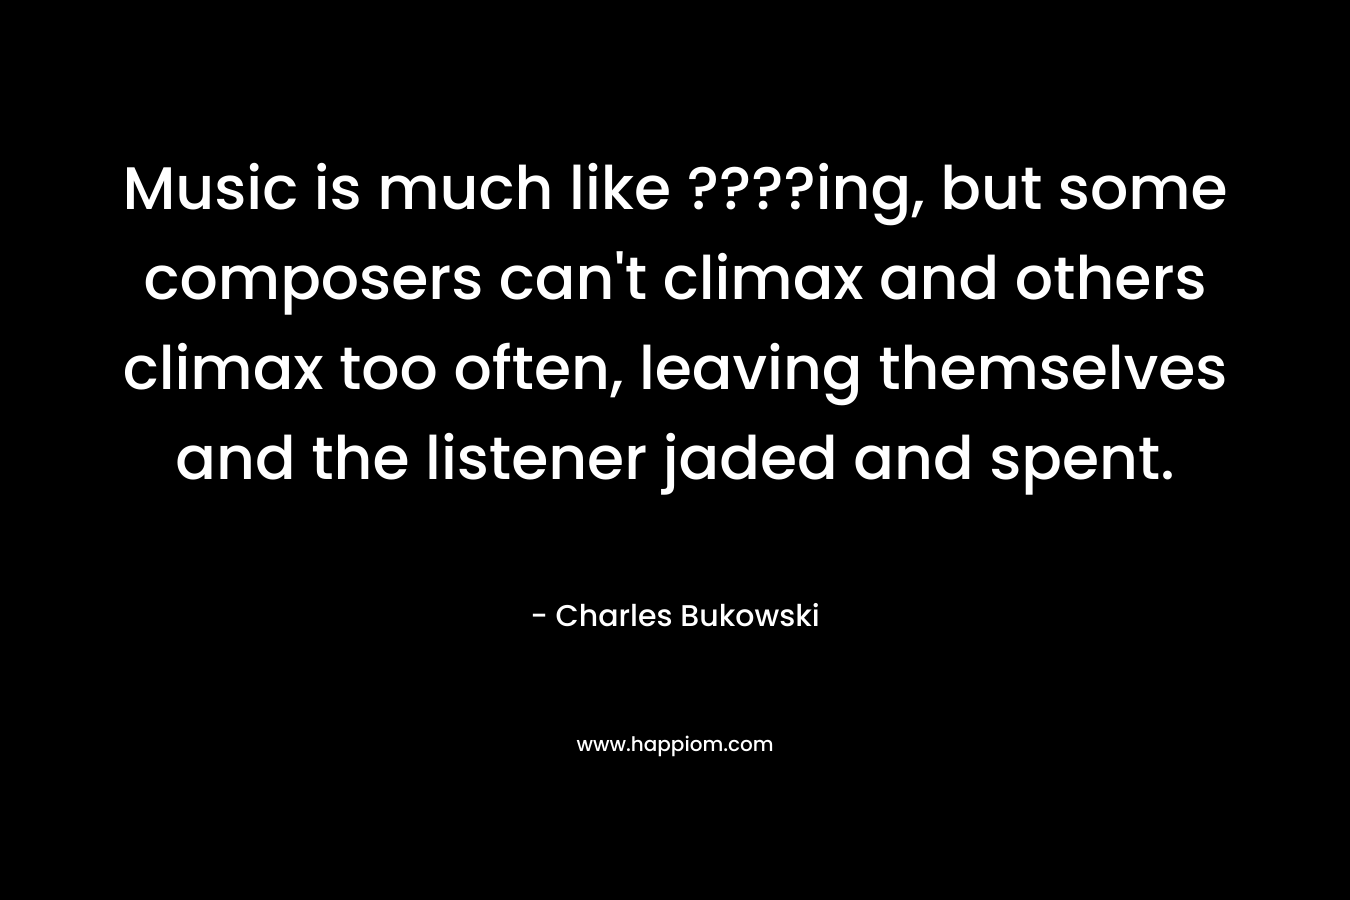 Music is much like ????ing, but some composers can’t climax and others climax too often, leaving themselves and the listener jaded and spent. – Charles Bukowski